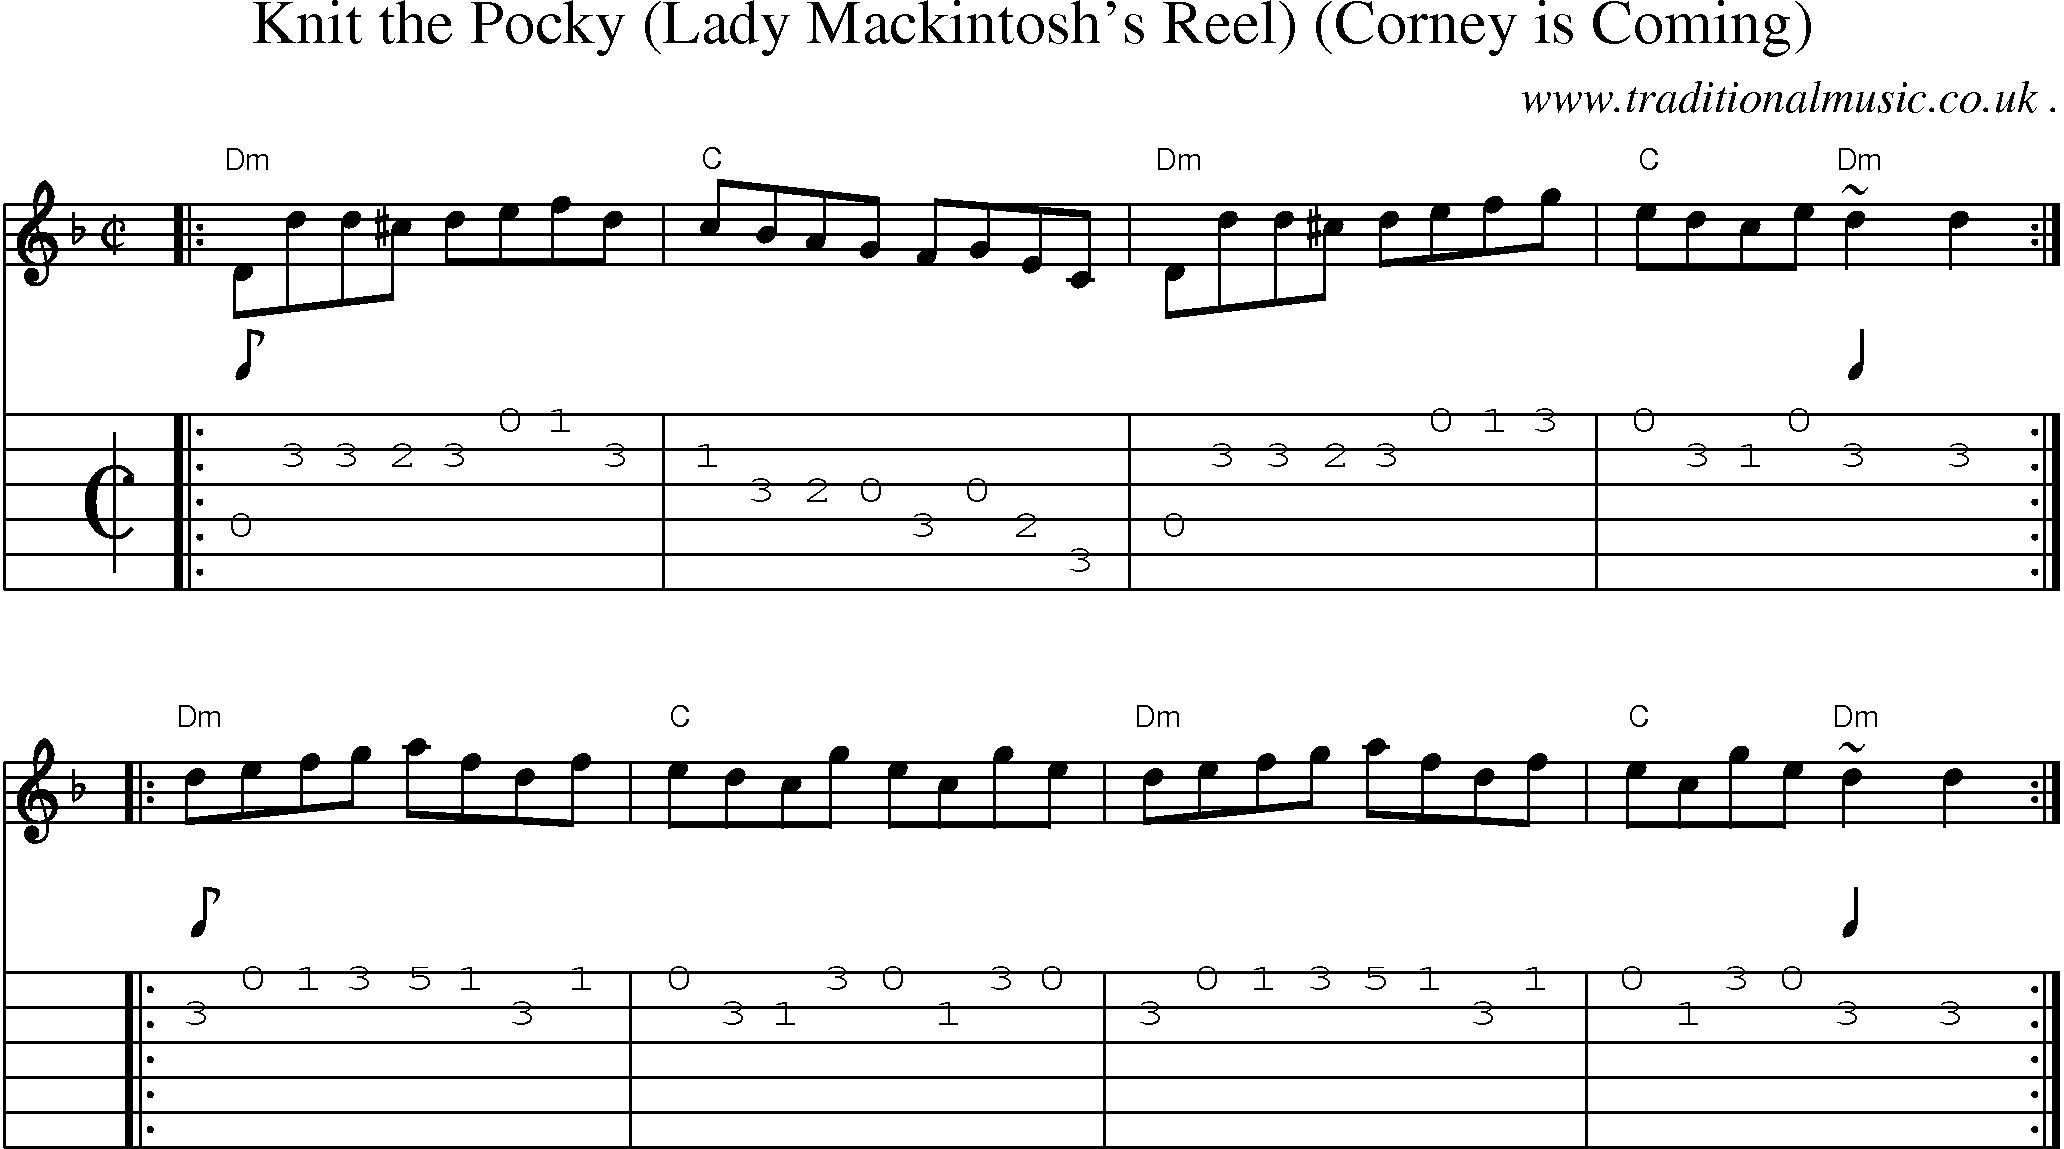 Sheet-music  score, Chords and Guitar Tabs for Knit The Pocky Lady Mackintoshs Reel Corney Is Coming